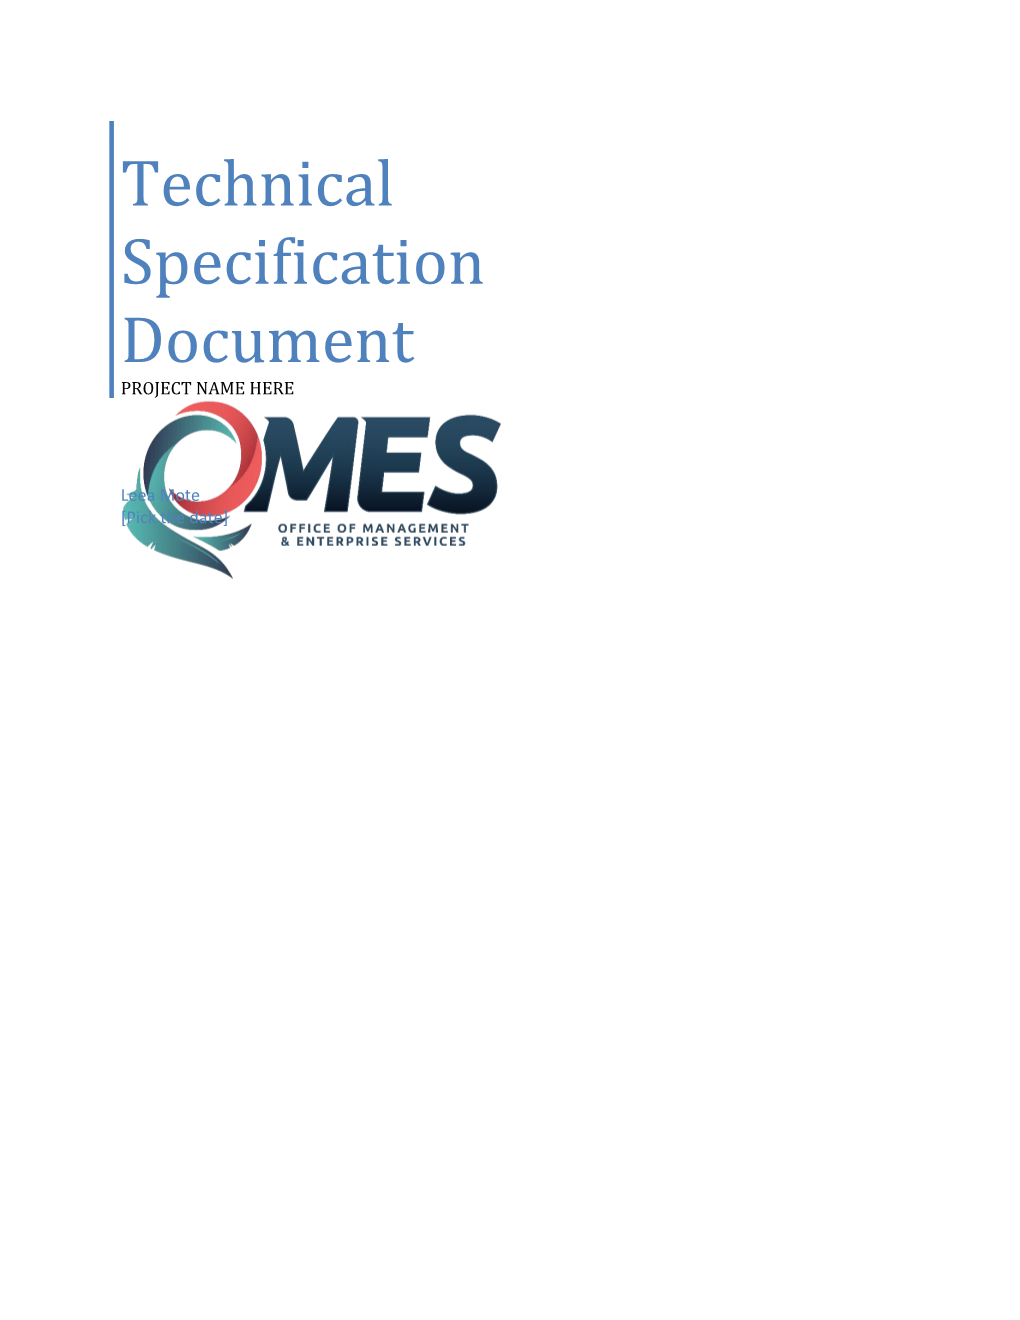 Technical Specification Document